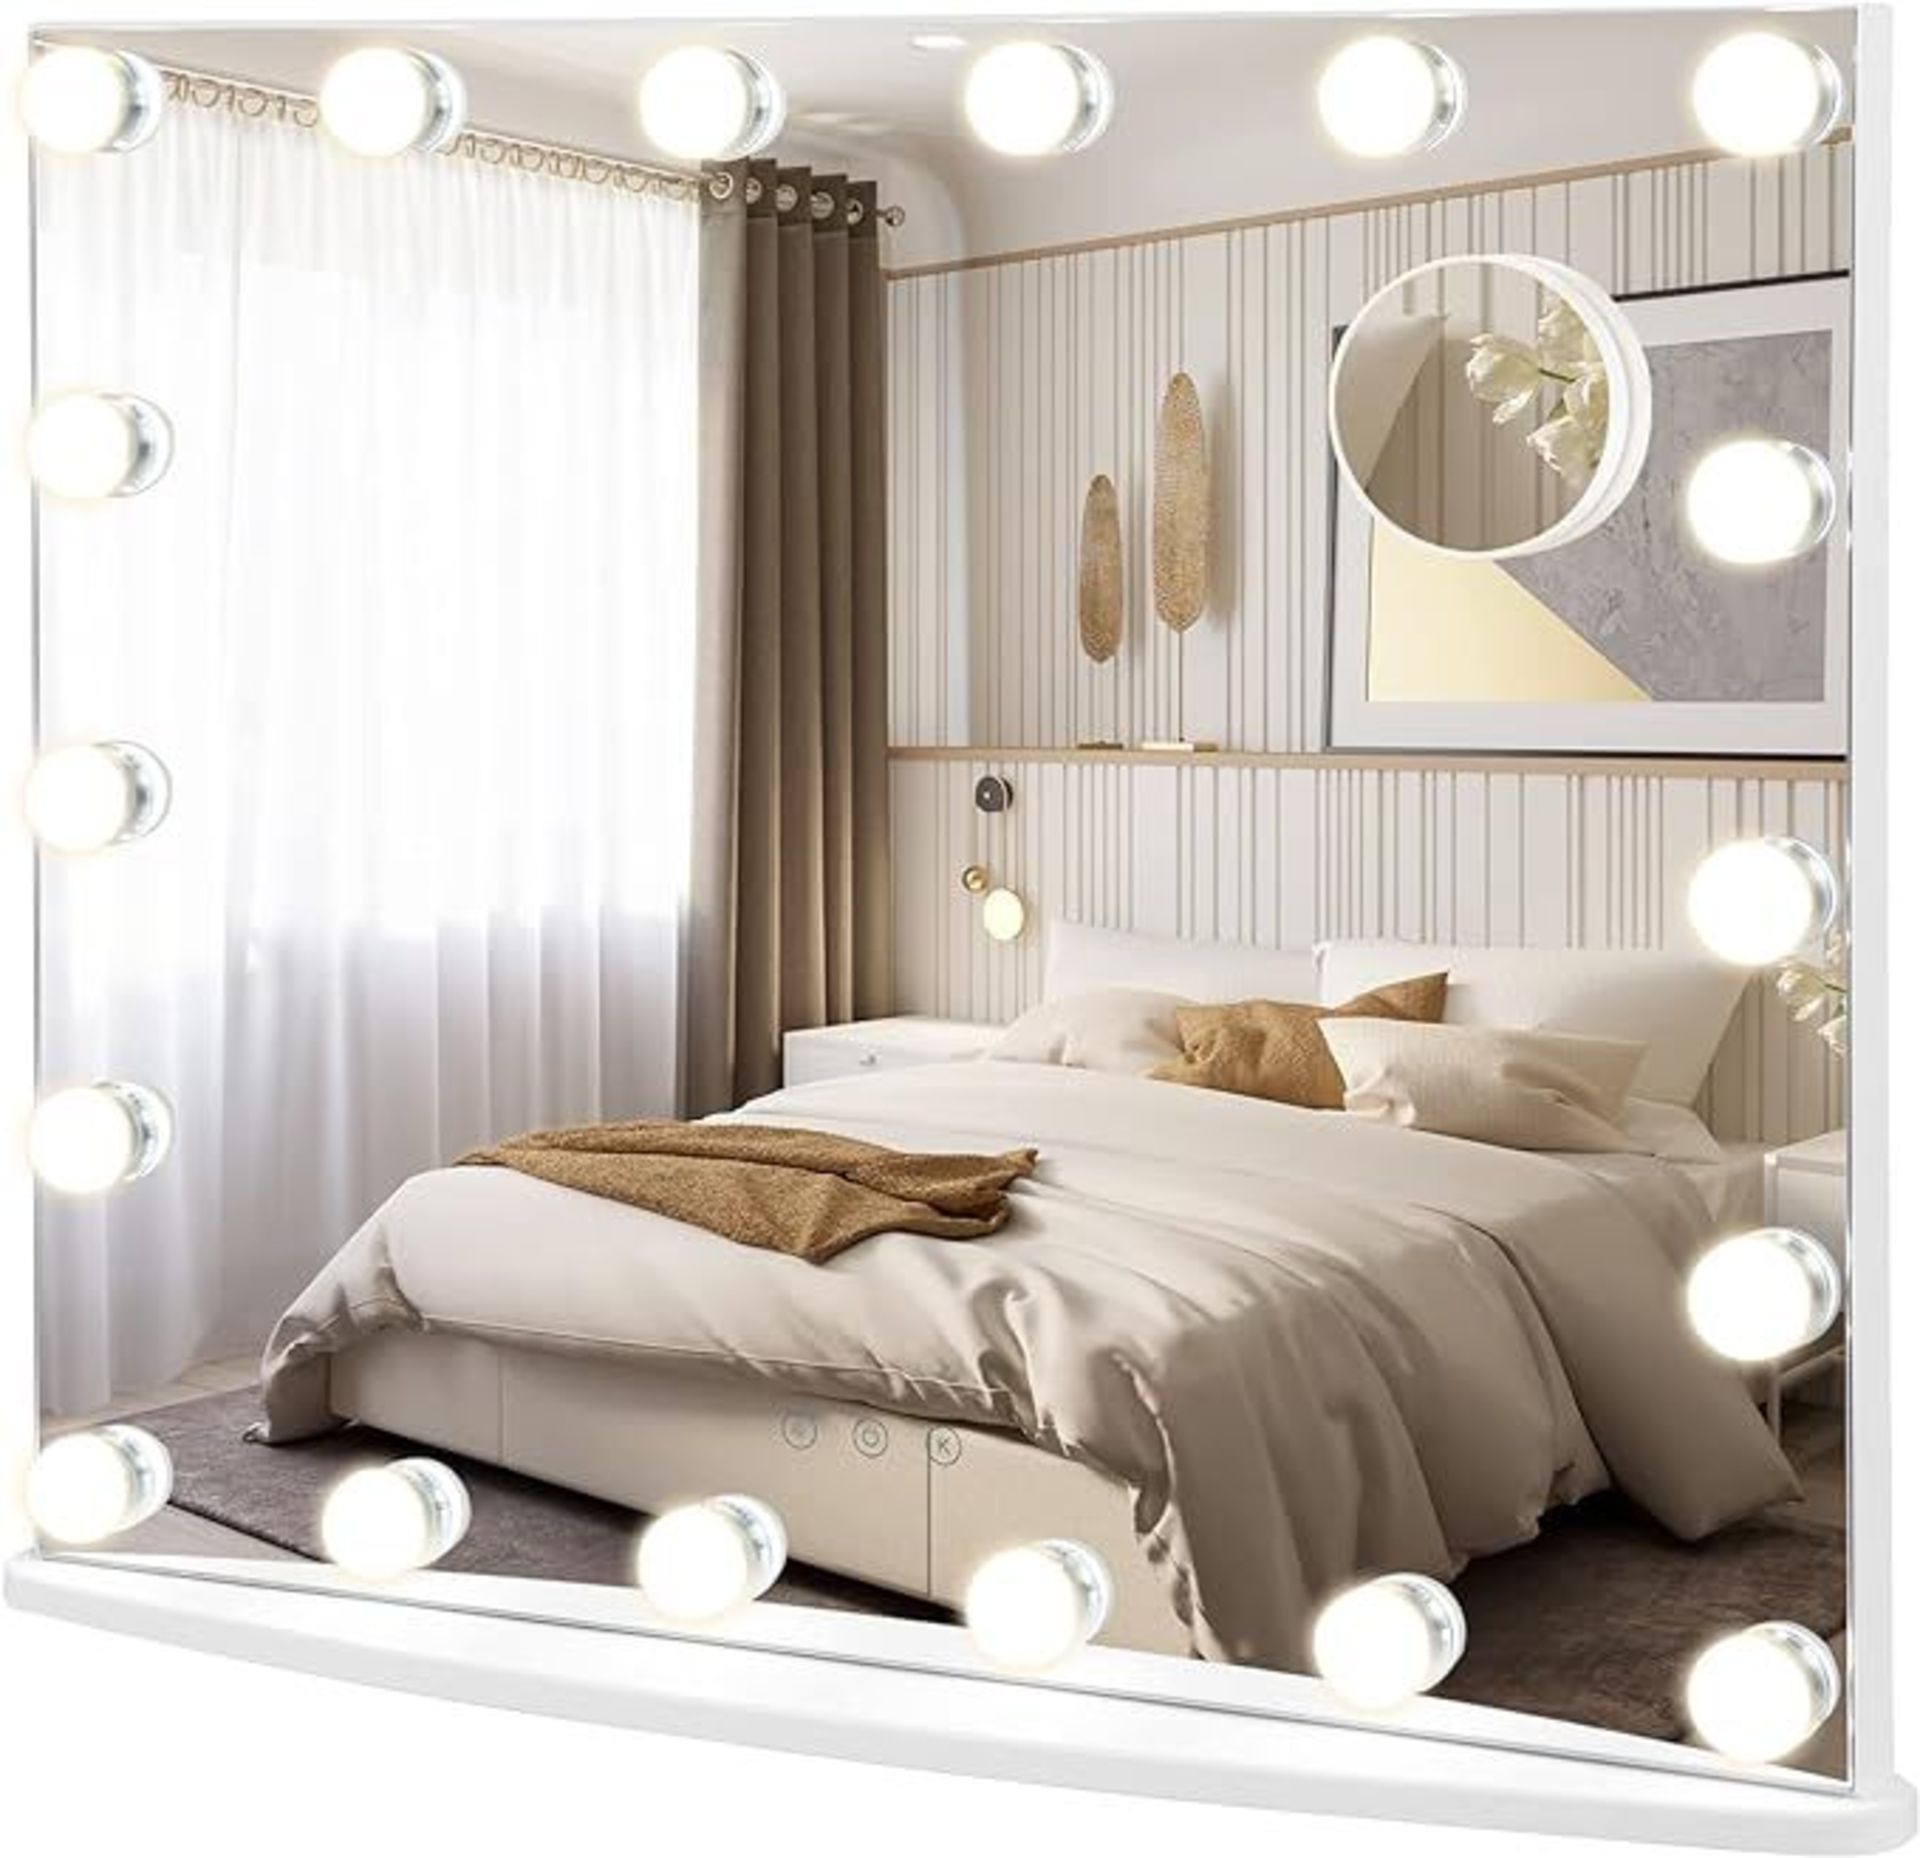 Hollywood Vanity Mirror, Tabletop/Wall Mounted Makeup Mirror with 18 Dimmable LED Bulbs, 3X